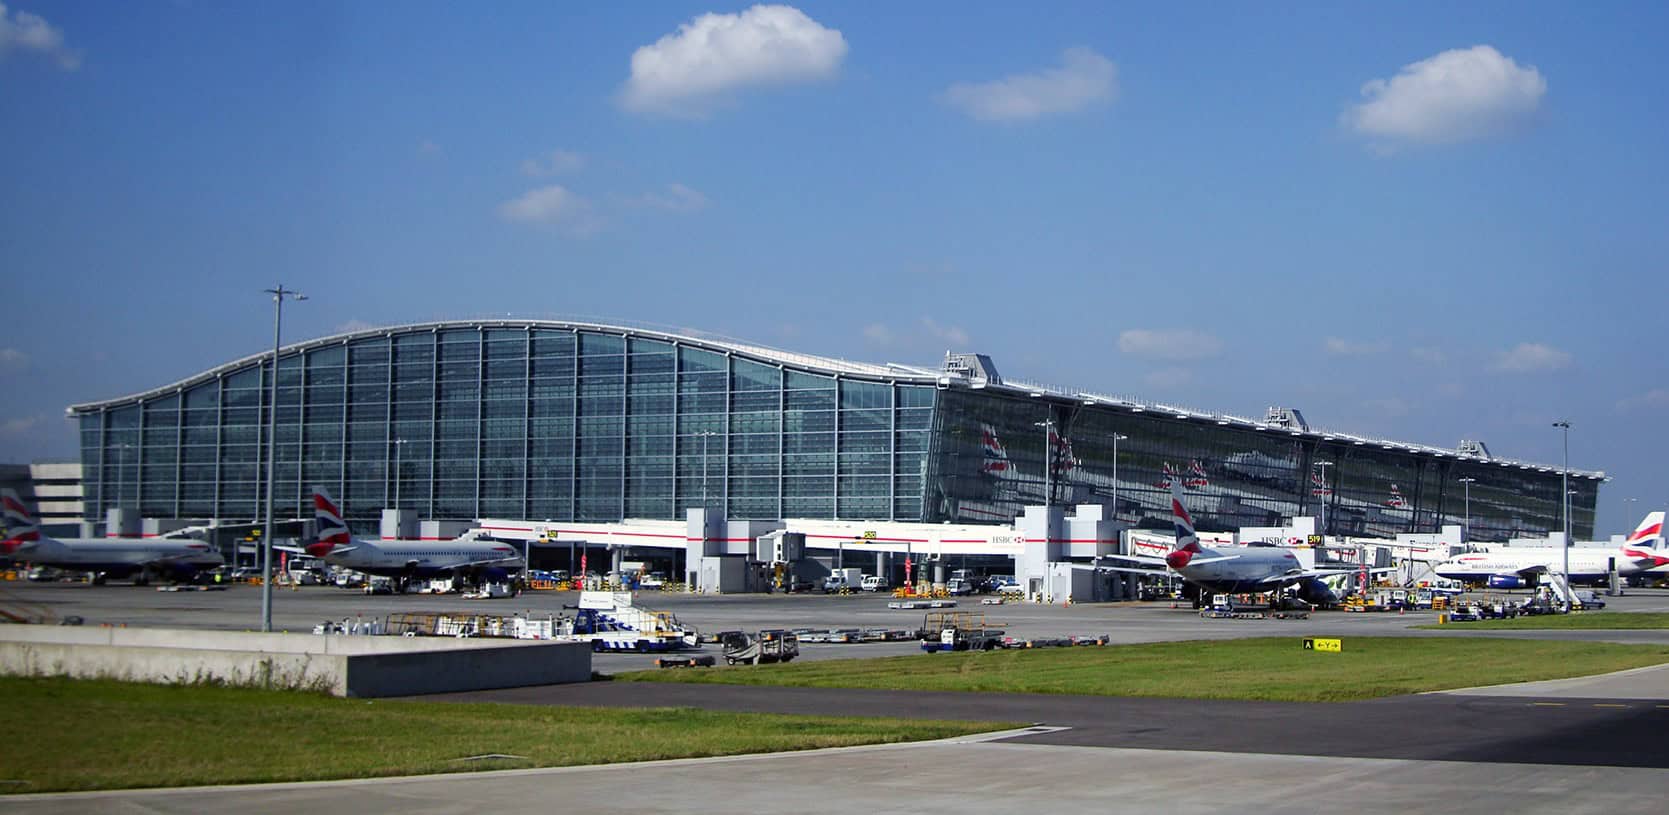 <p>With approximately eight million passengers passing through it annually, London Heathrow is unquestionably the biggest and one of the most efficient airports in Europe. </p><p>Remember to scroll up and hit the ‘Follow’ button to keep up with the newest stories from Seattle Travel on your Microsoft Start feed or MSN homepage!</p>